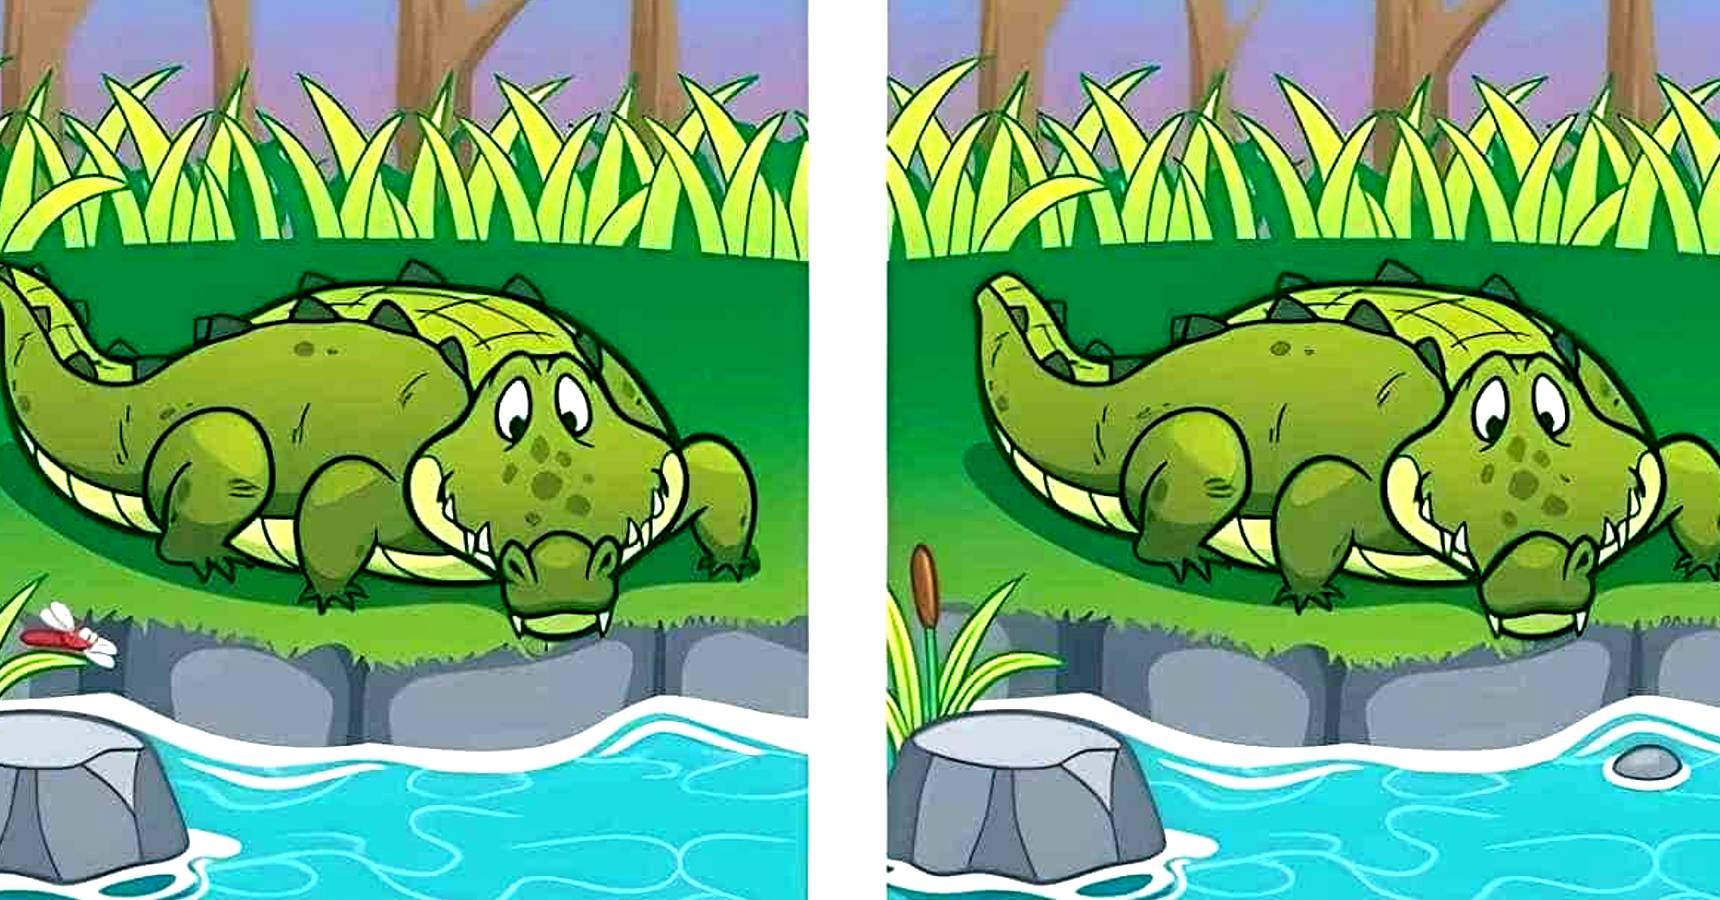 Brain teaser can you find 5 differences between the two crocodiles within 13 seconds